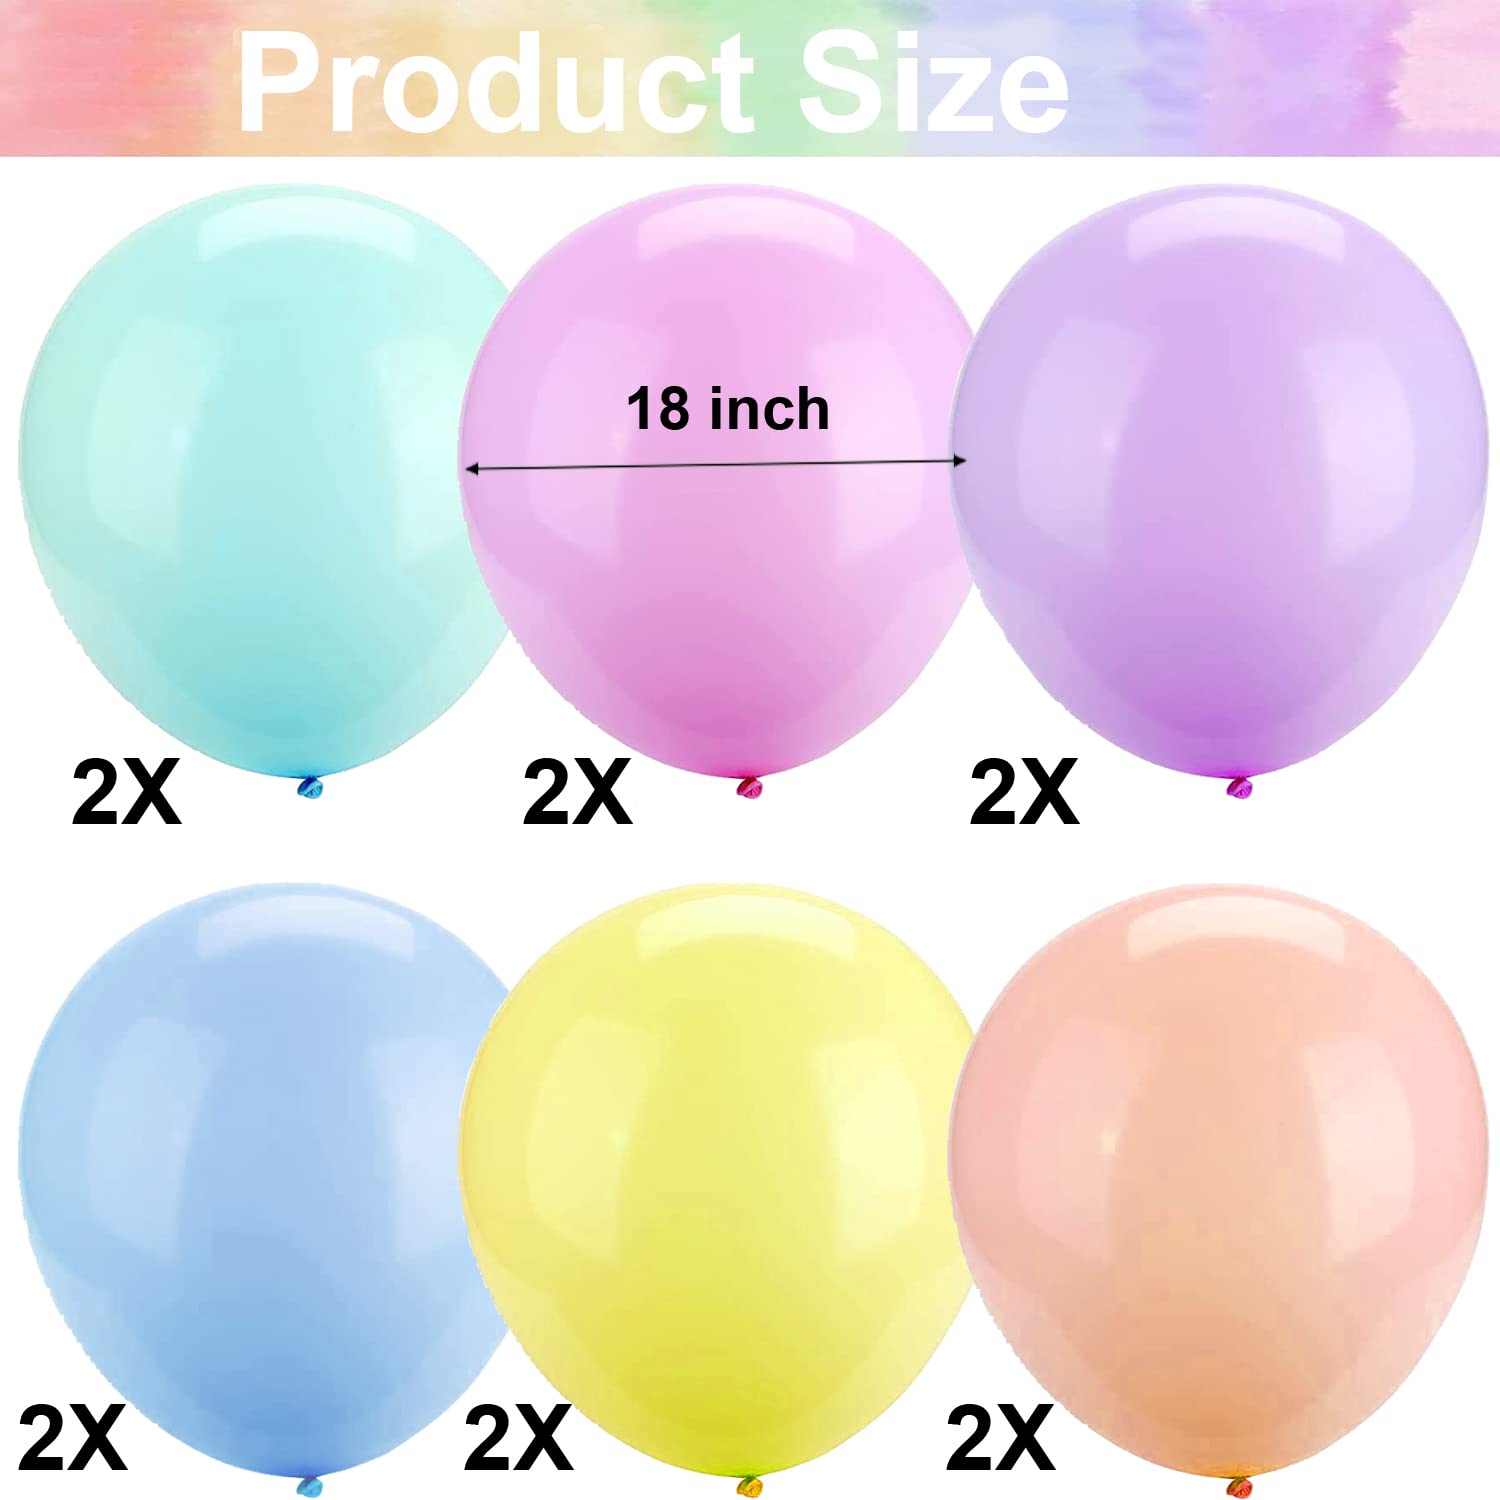 KAKOLOPT Pastel Balloons 18 Inch / 45cm 12 Pcs Large Pastel Balloons Macaron Latex Balloons Assorted Colorful Jumbo Christmas Party Balloons for Baby Shower Kid Birthday Wedding Party Decorations